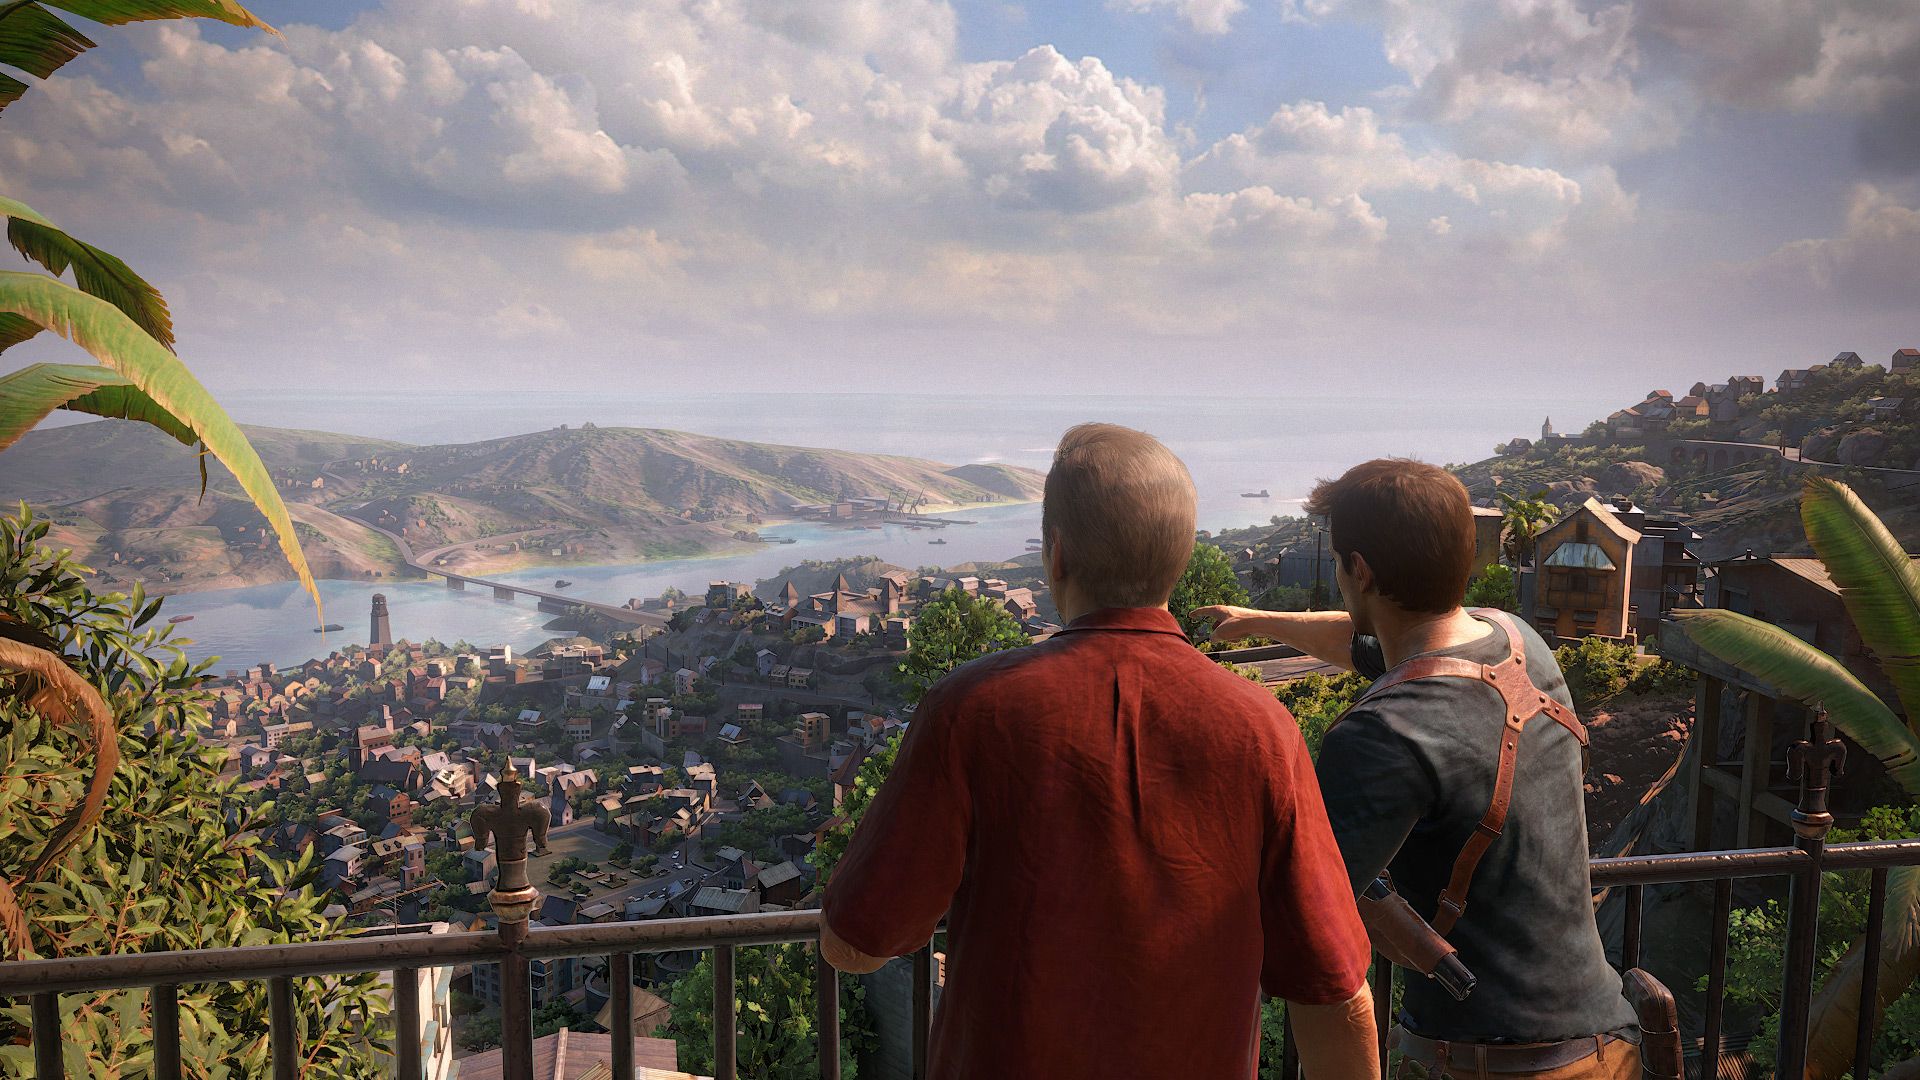 Rumour: Uncharted Collection's Getting A PC Port This December